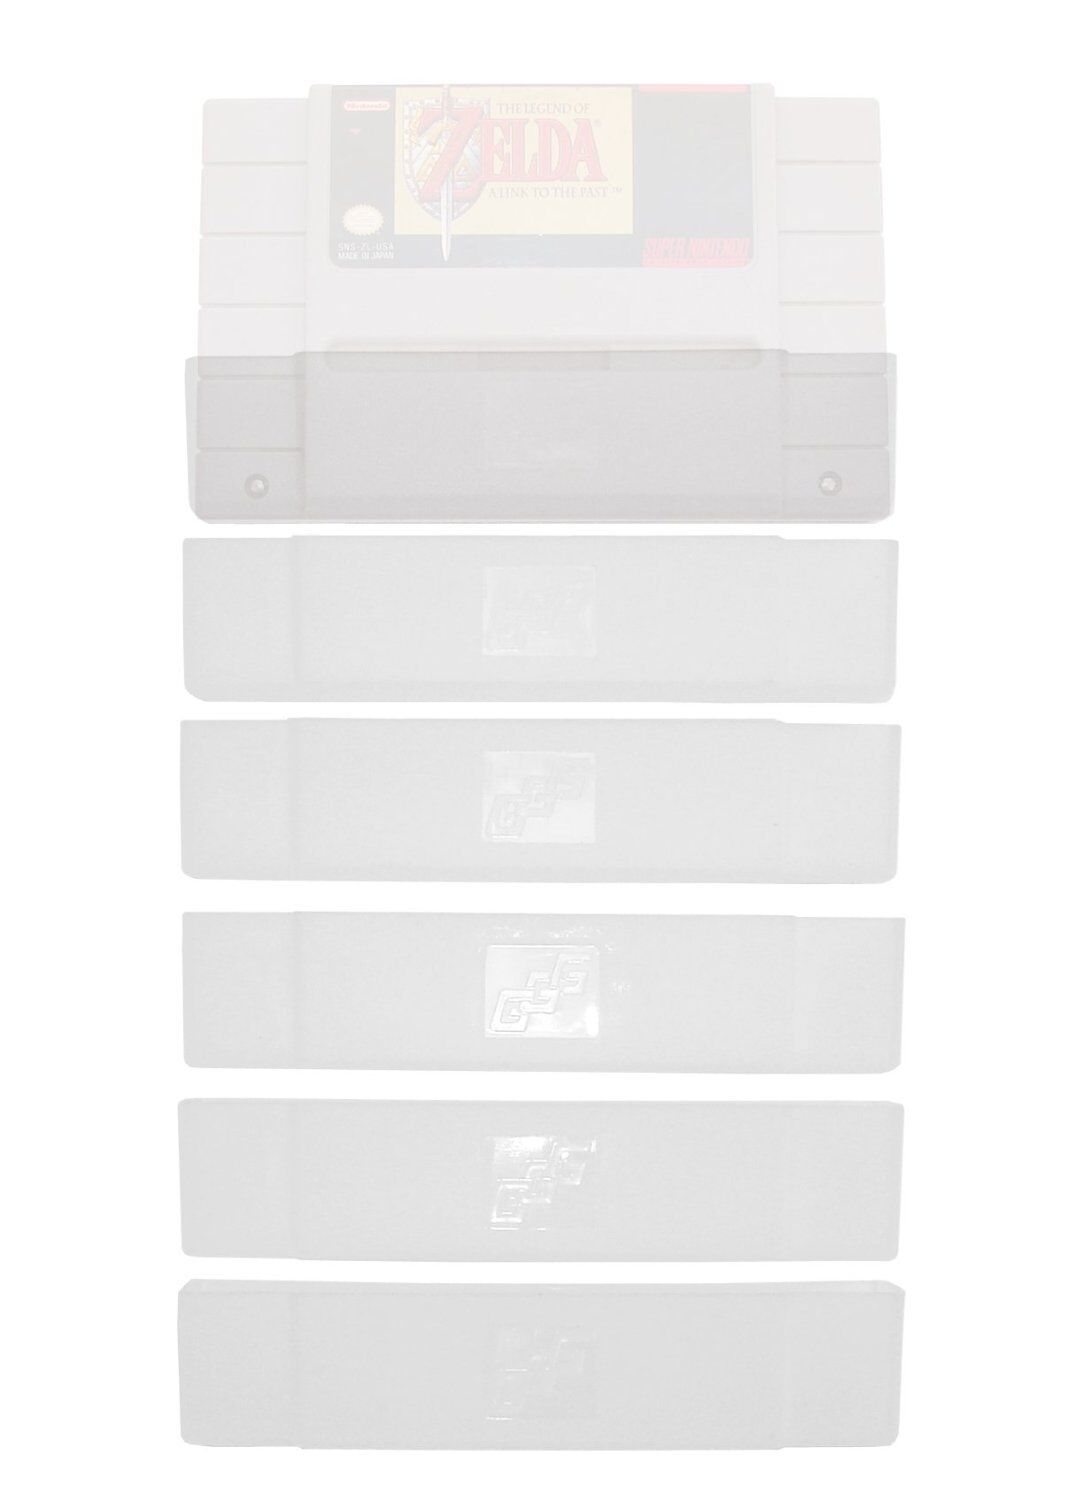 12 pc Super Nintendo SNES Cartridge Dust Cover - GGG0018  Global Game Gear Does Not Apply